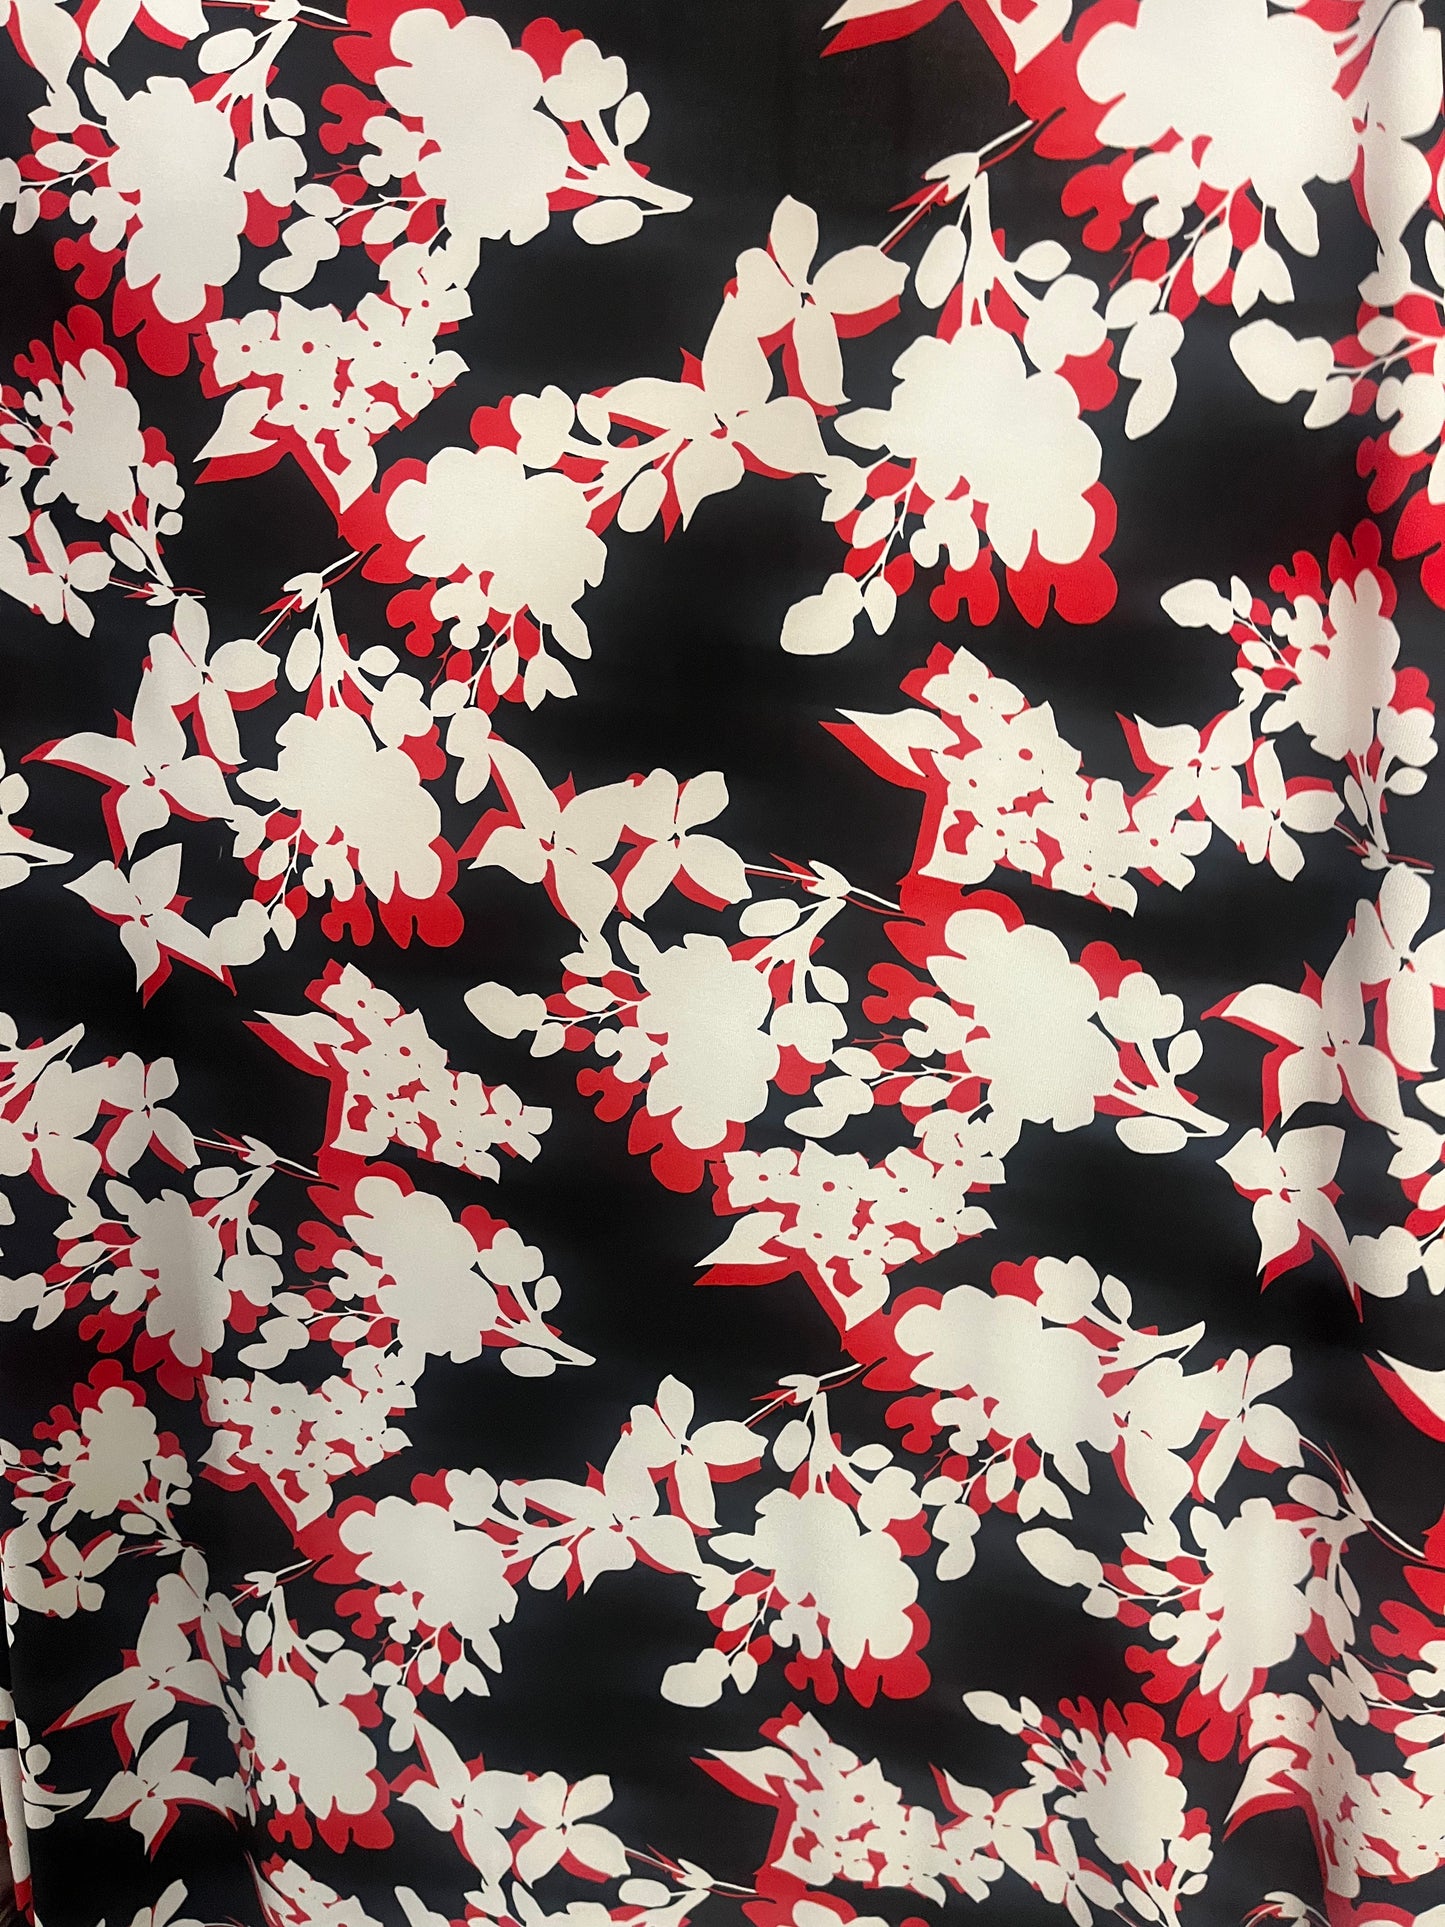 Graphic Floral Print ITY - Balck, White & Red